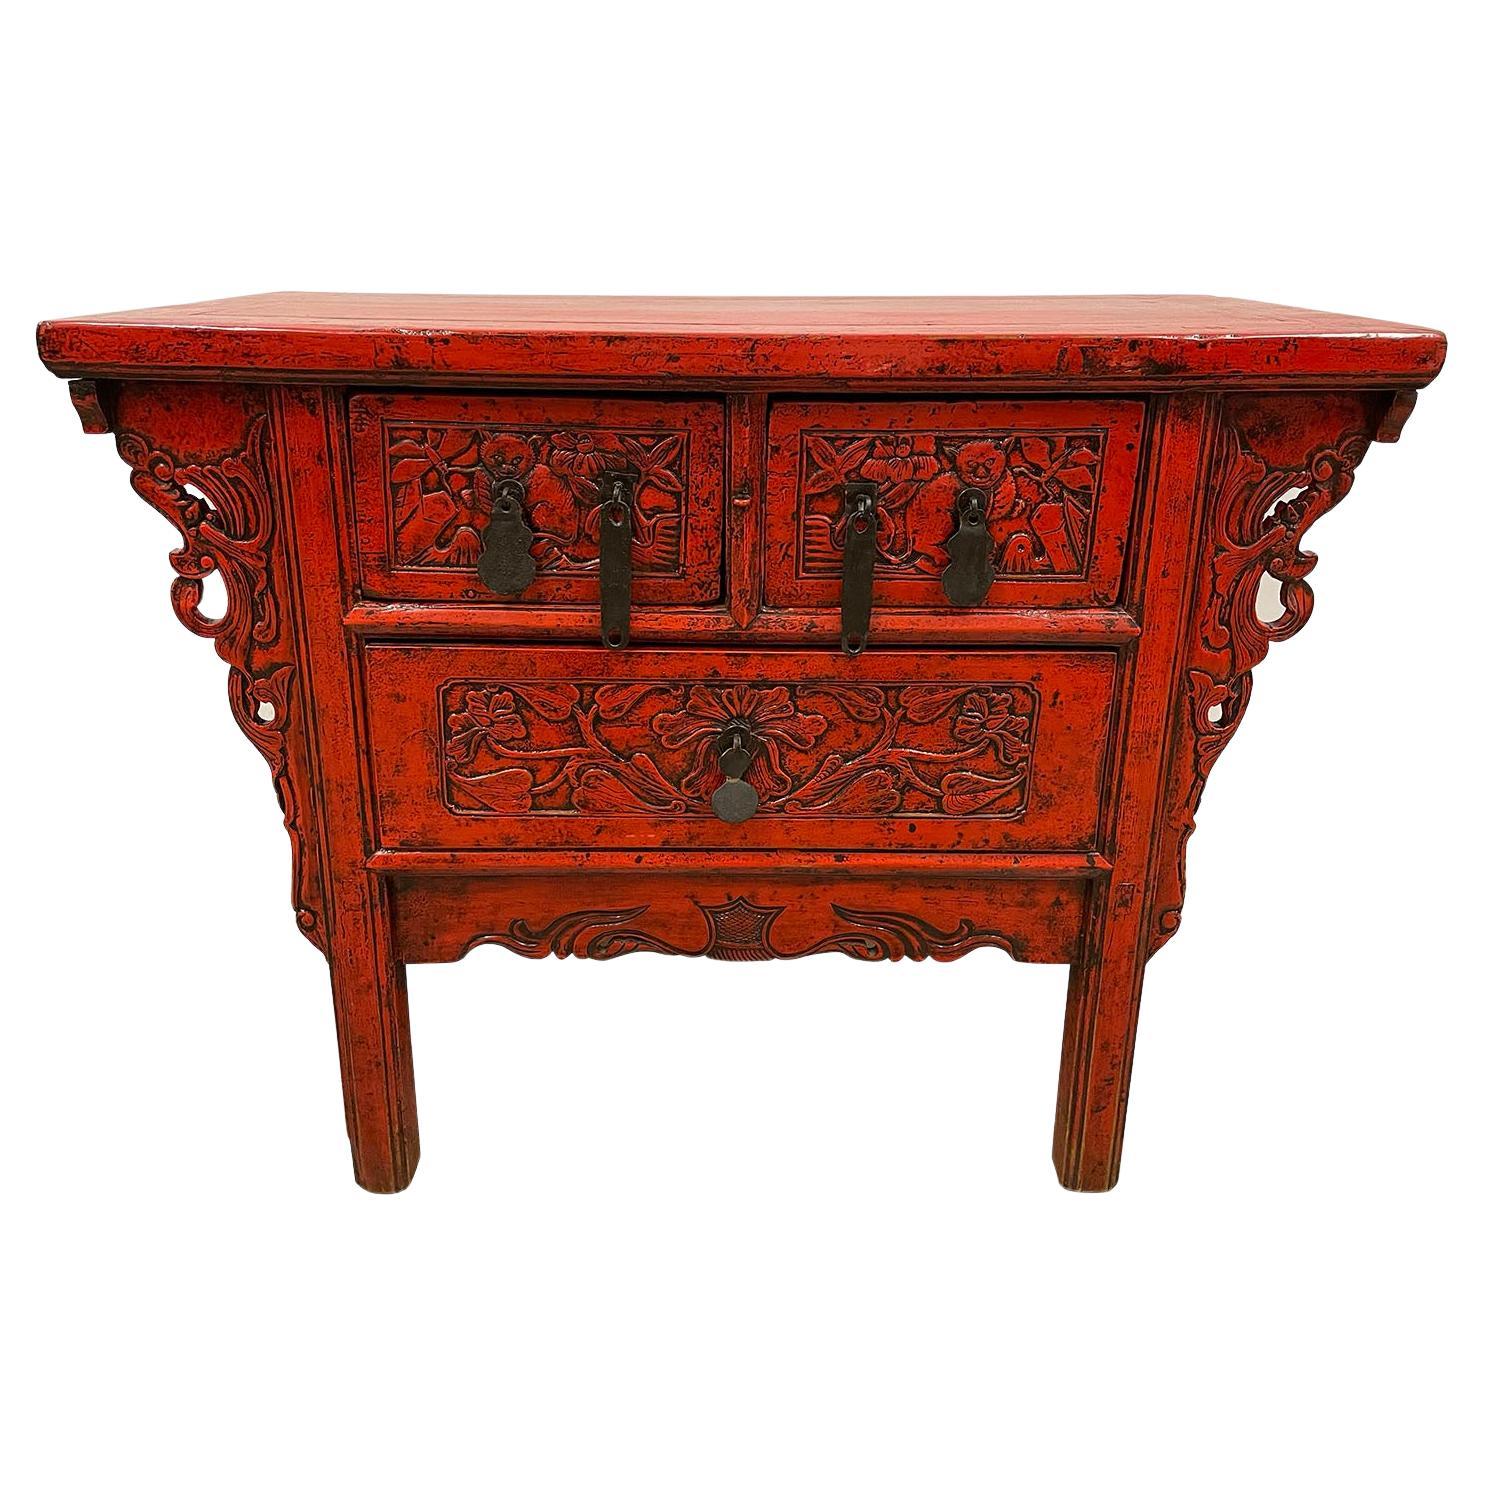 19th Century Antique Chinese Carved Red Lacquer Console Table / Sideboard